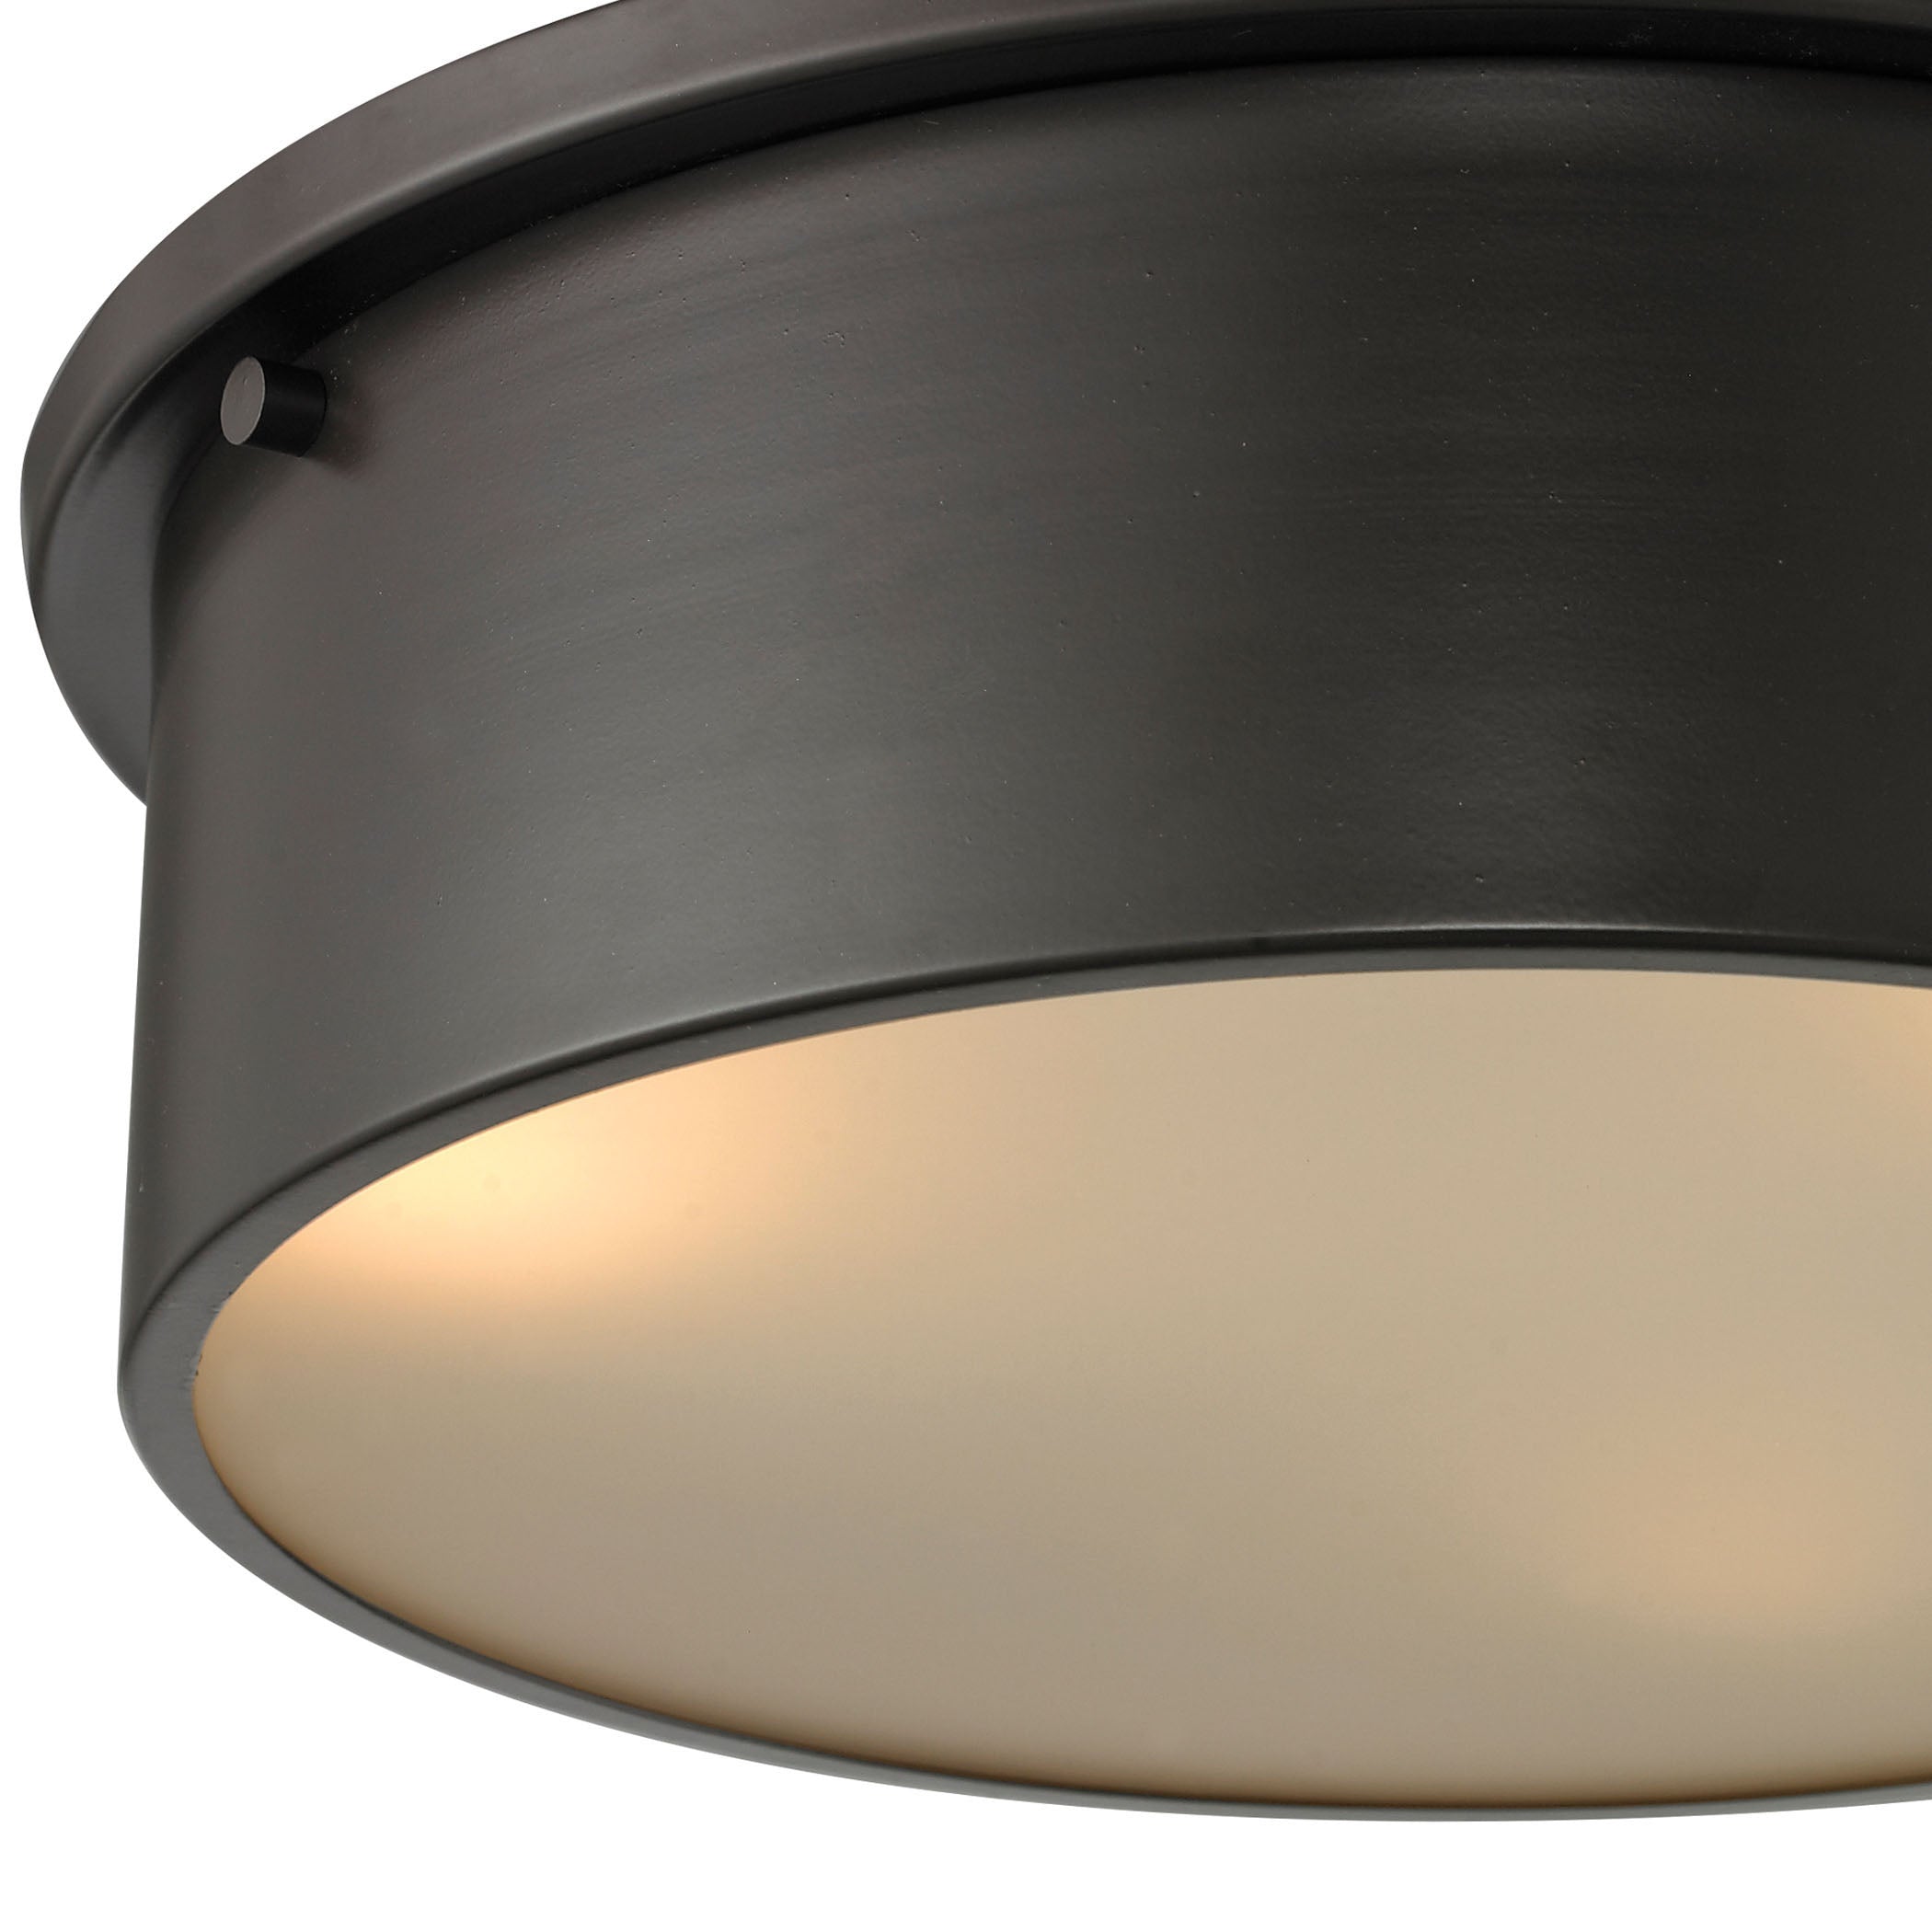 ELK Lighting 11811/3 Simpson 3-Light Flush Mount in Oil Rubbed Bronze with Frosted White Diffuser